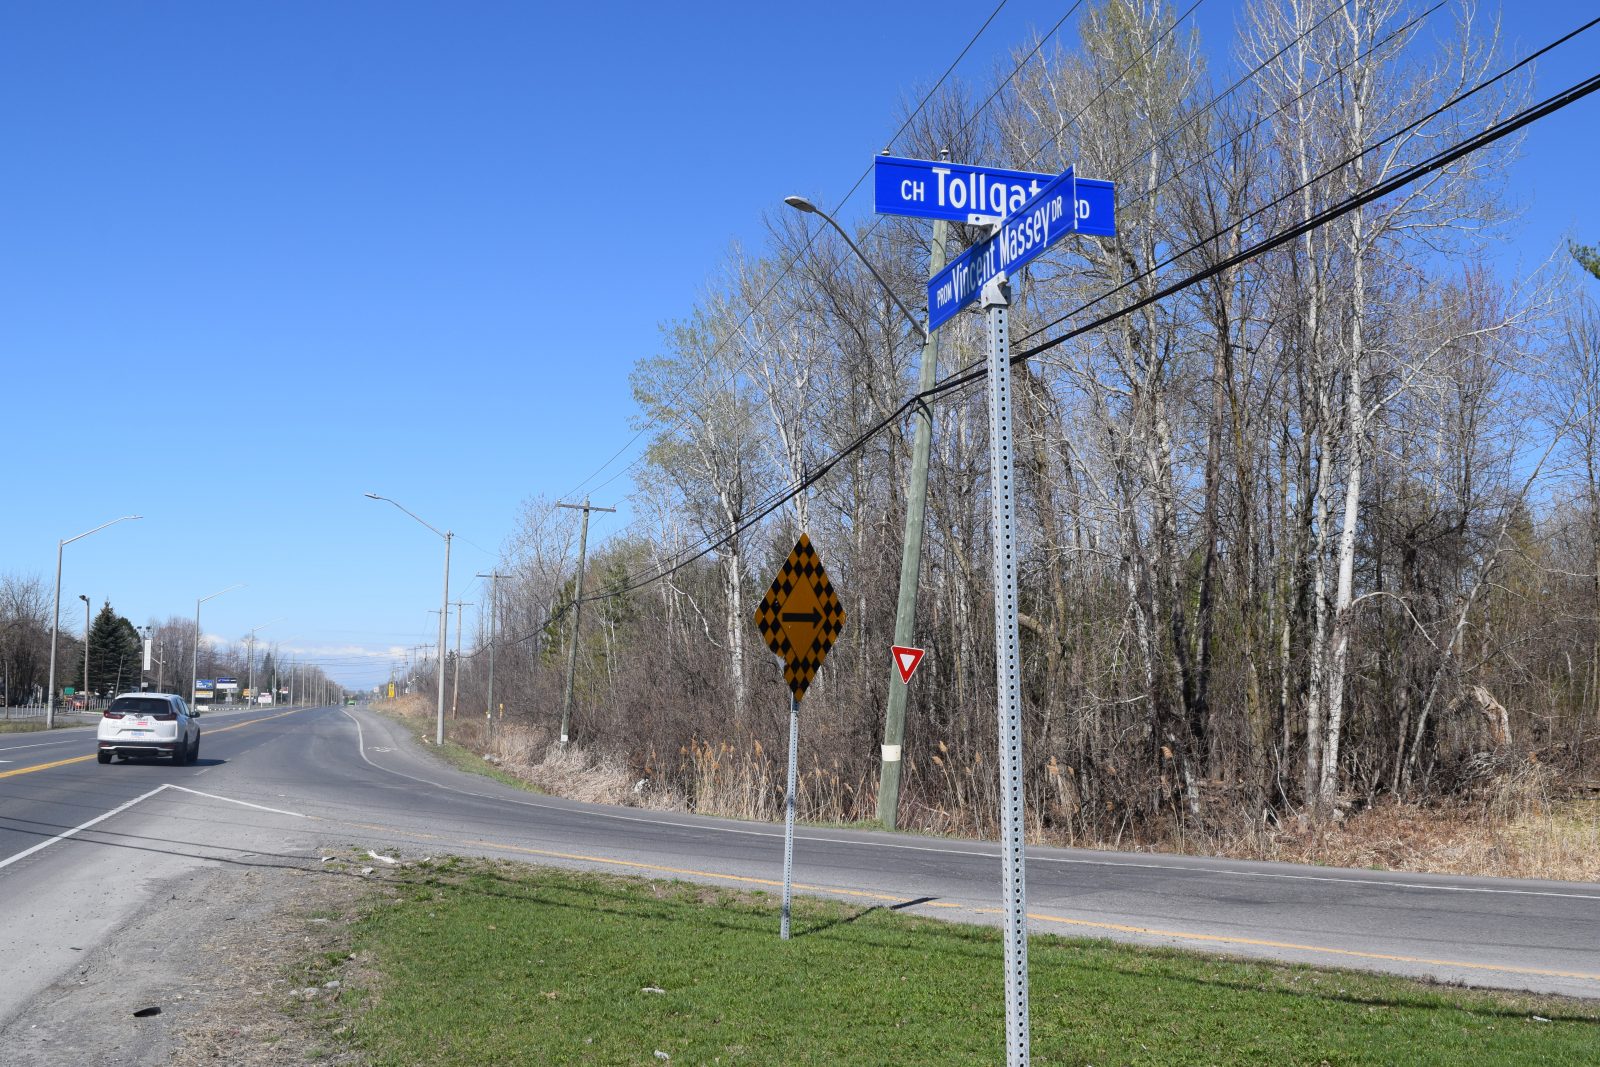 Councillor wants to see something done this year about Tollgate-Vincent Massey intersection